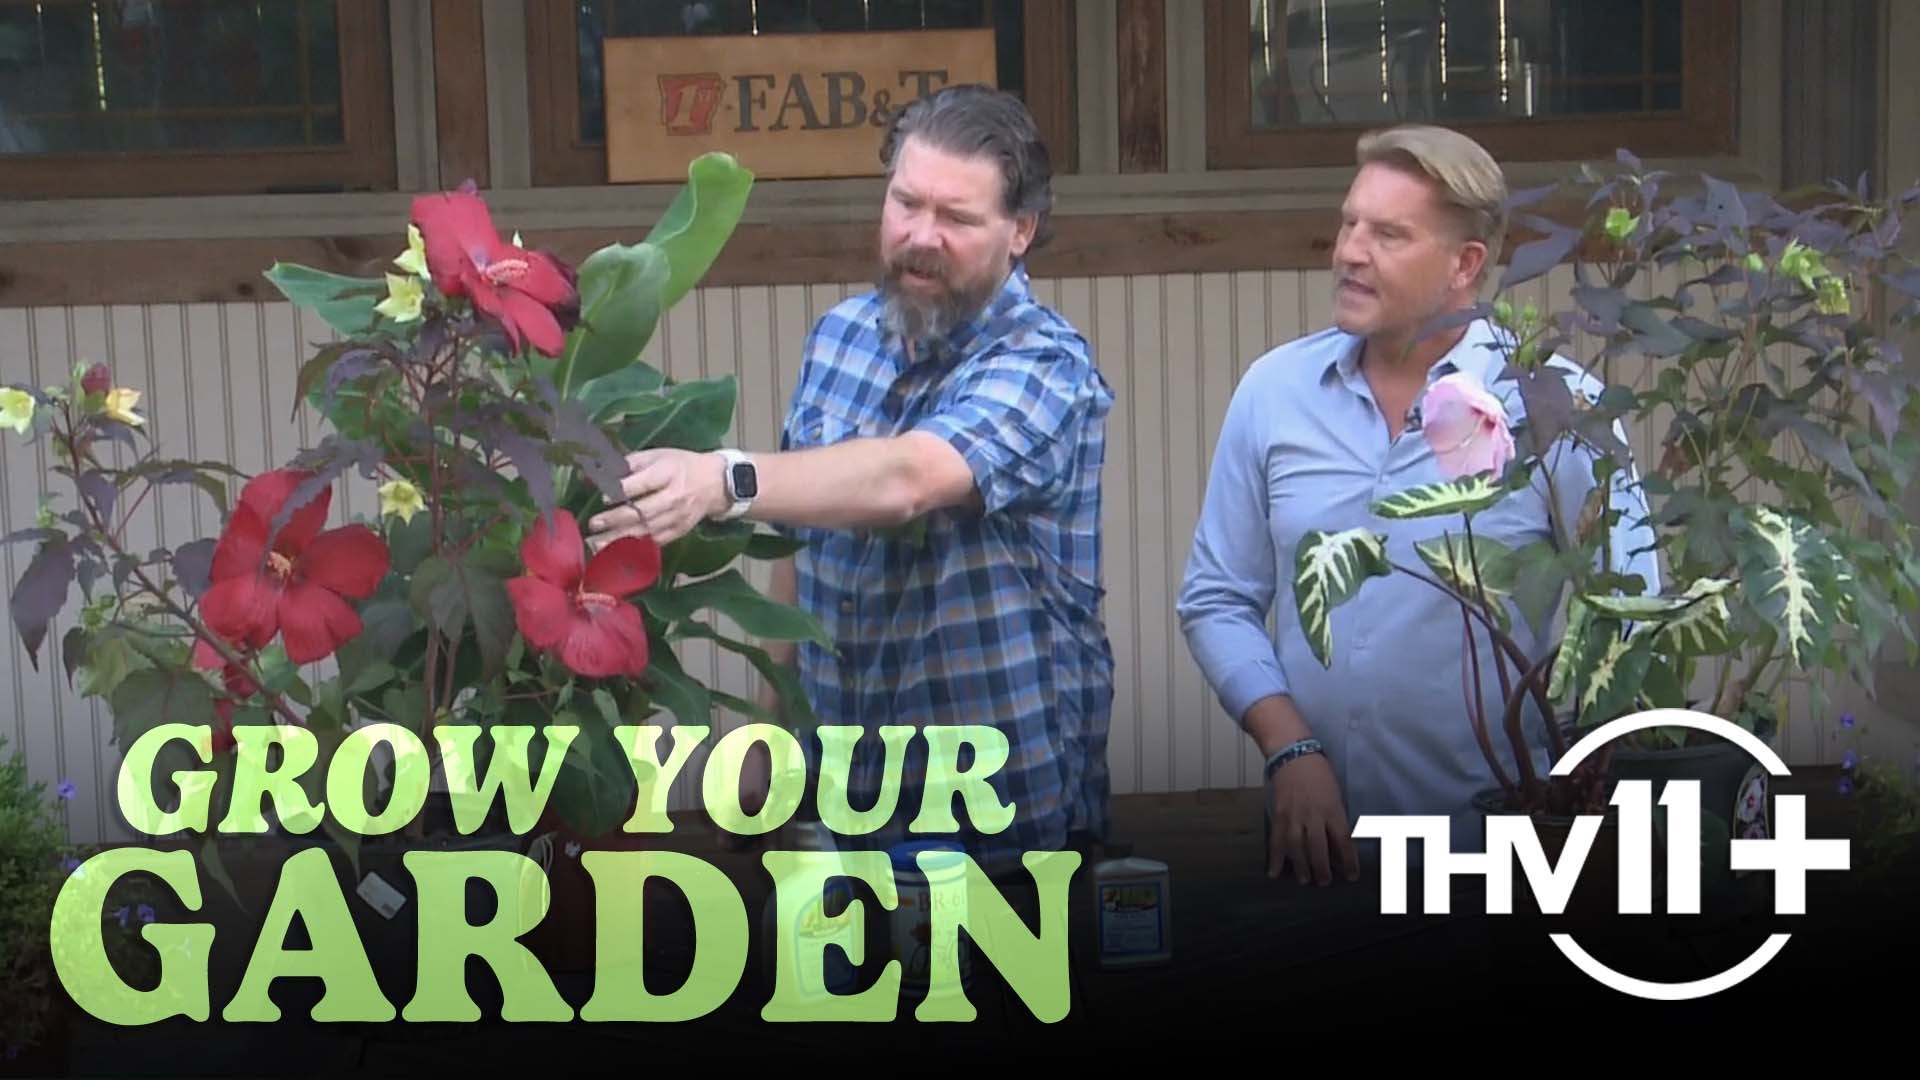 The summer heat is in full effect as Chris H. Olsen teaches us how to plant Japanese maples, tropical perennials, and how to water our plants.